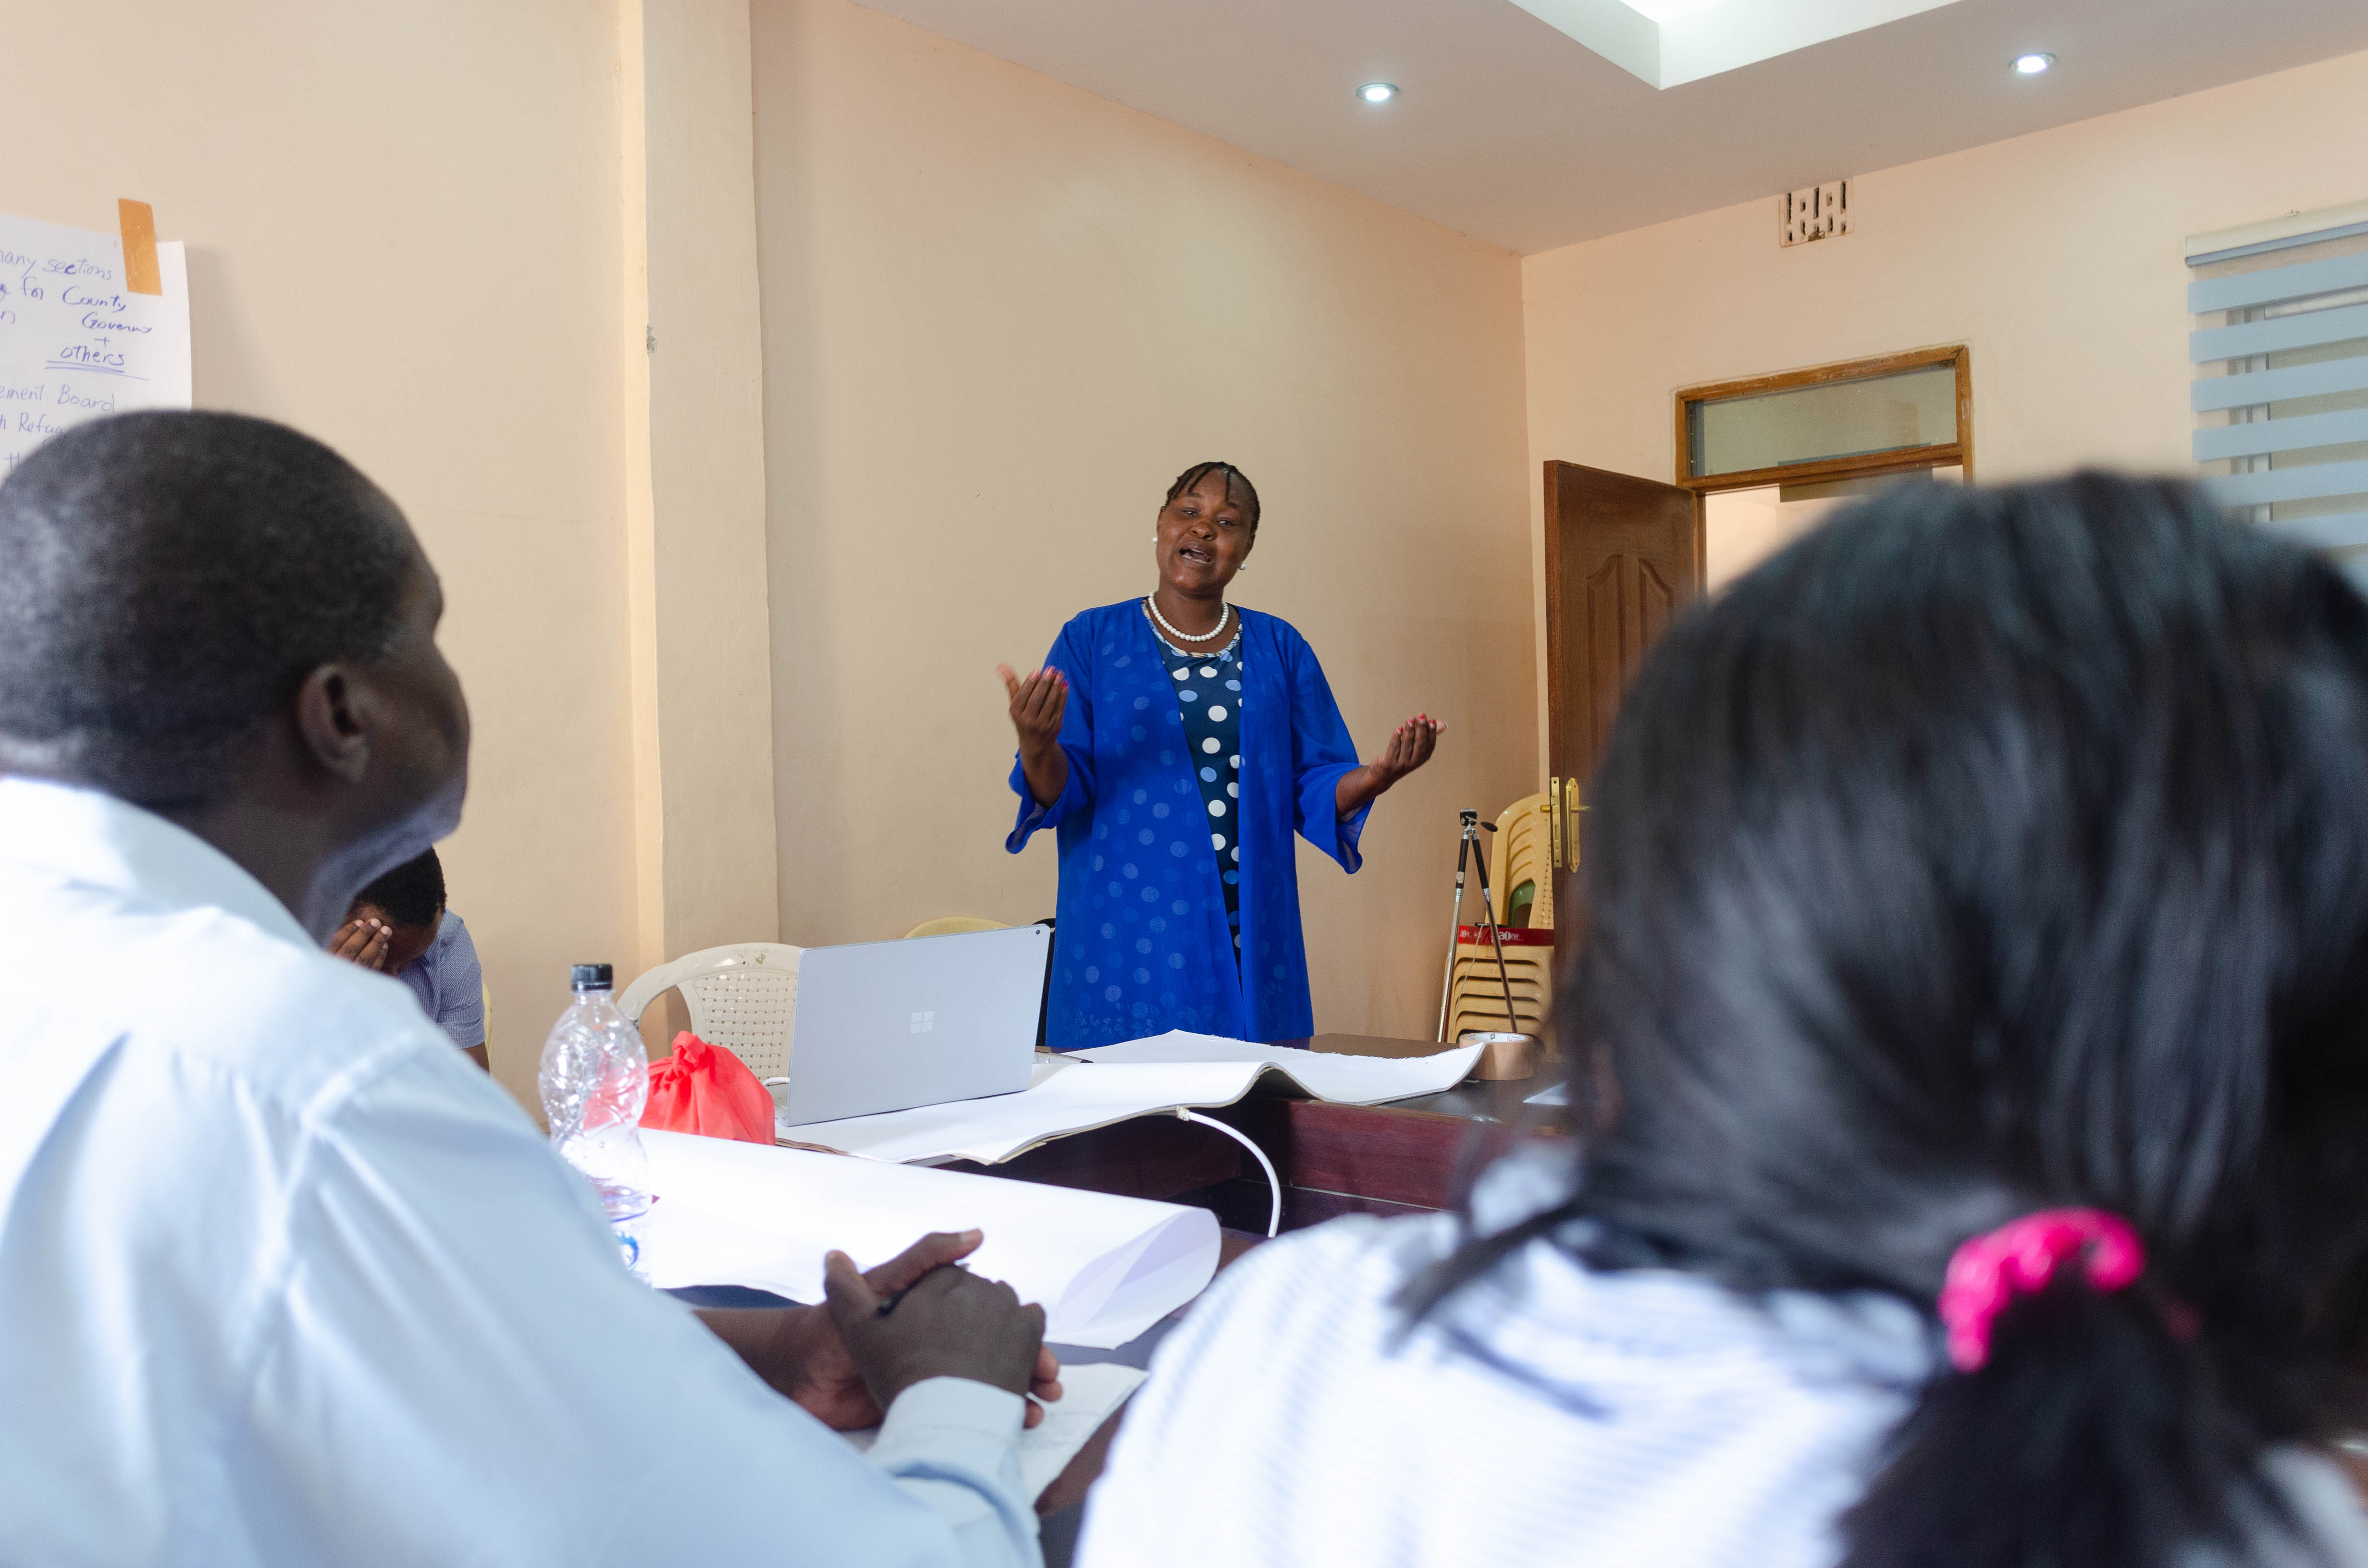 CECM Esther Lokwei Lokiyo offering her opinions on discussions within the workshop